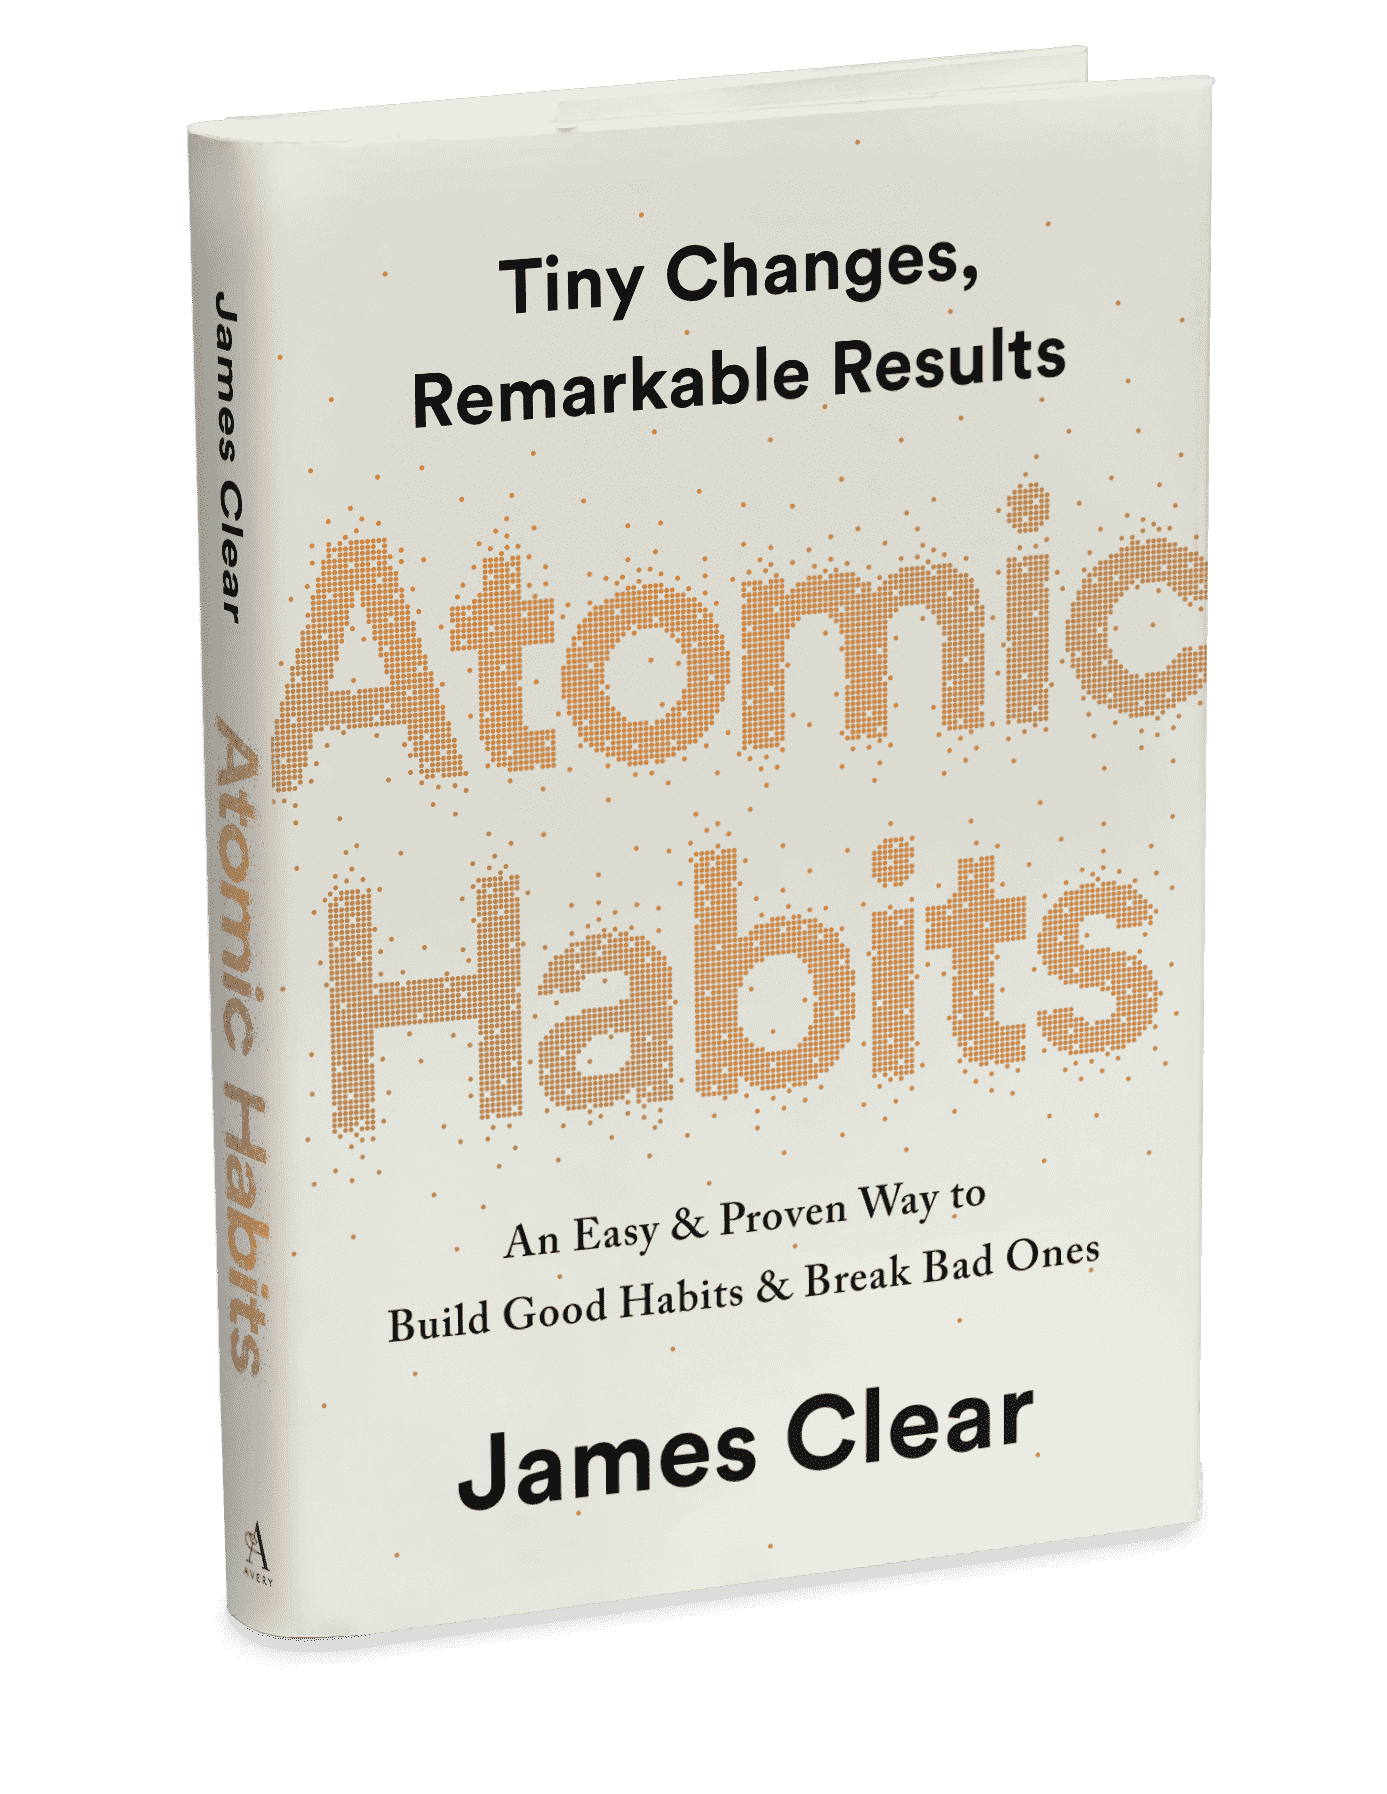 download the new version Atomic Habits